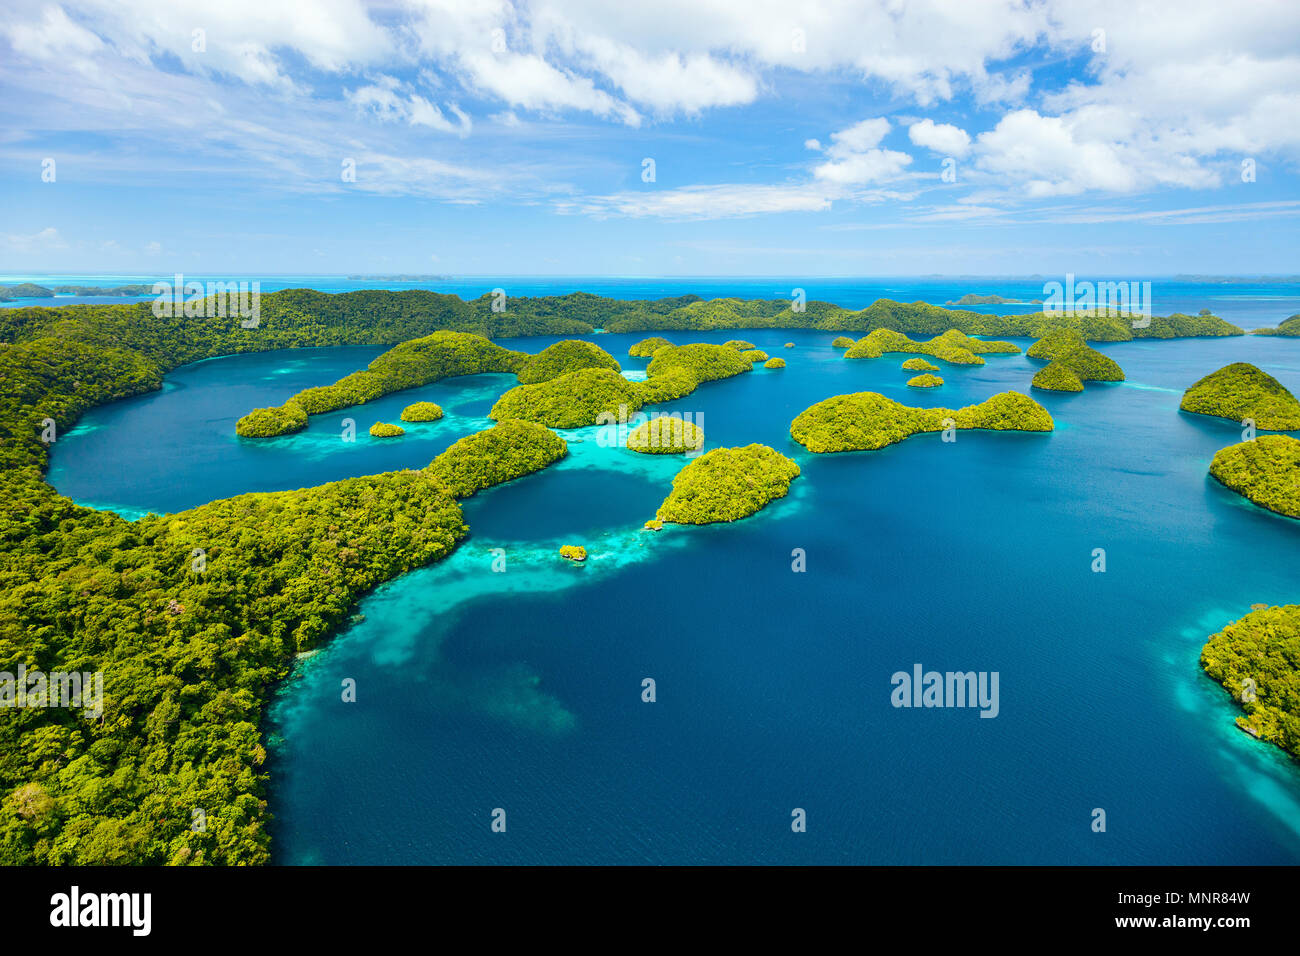 Beautiful view of Palau tropical islands and Pacific ocean from above Stock Photo